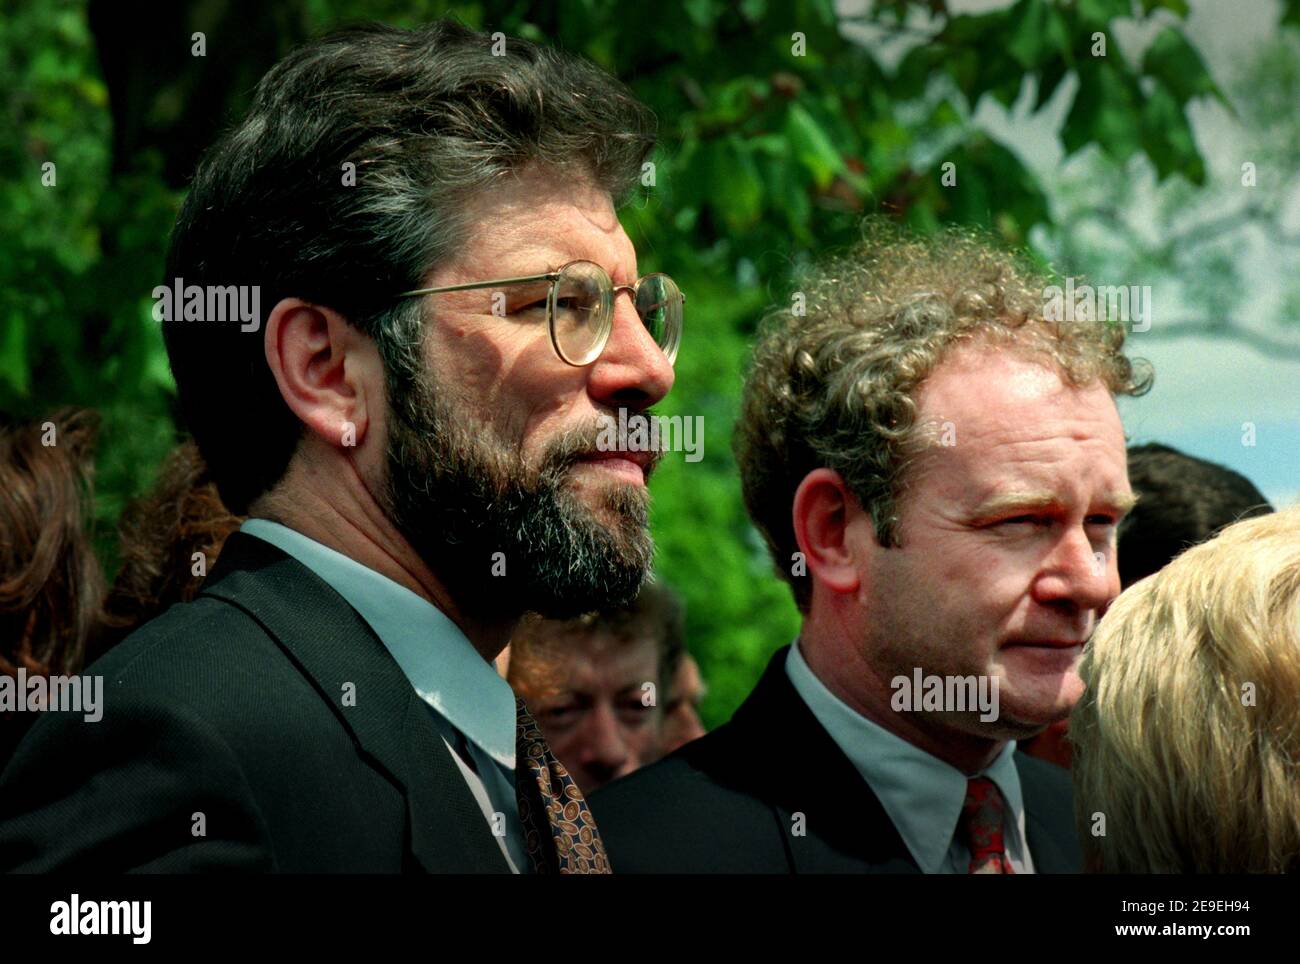 Northern Ireland Peace Talks in Belfast June 1996 Showing Sinn Fein Leaders Gerry Adams and Martin McGuinness who were all excluded from the Stormont peace negotiations at the time. Stock Photo